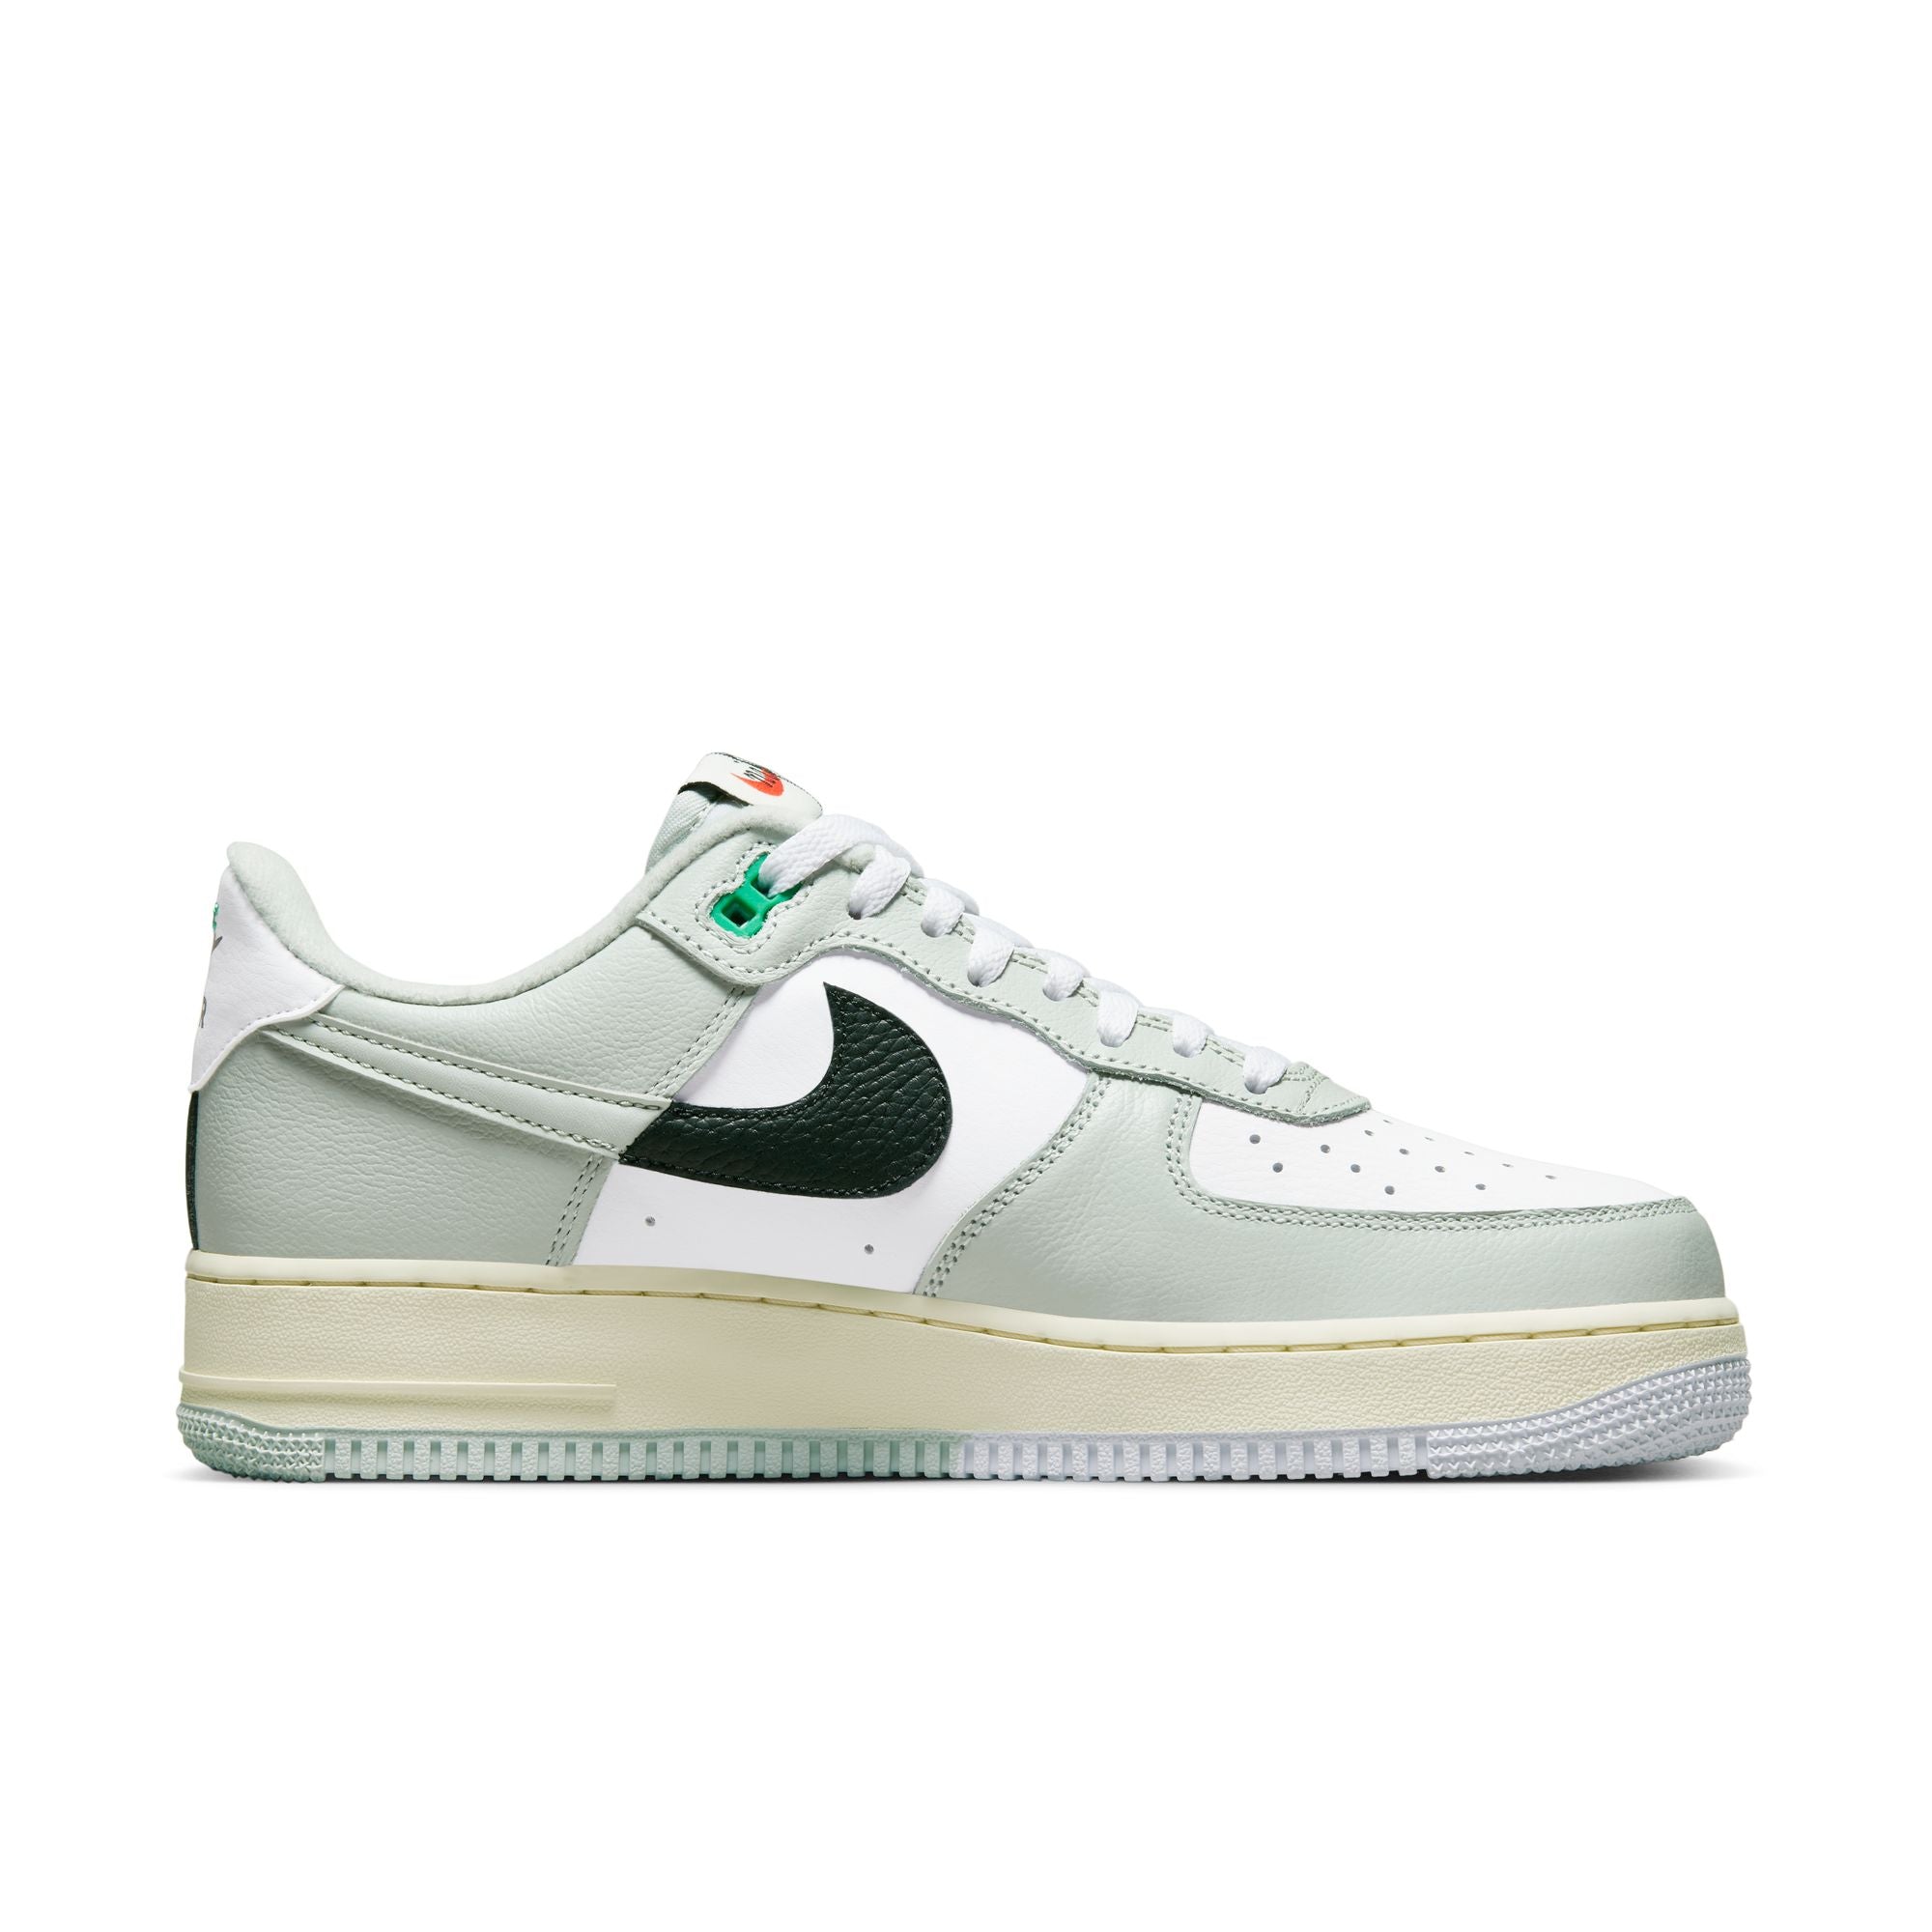 Nike Air Force 1 High '07 LV8 Pistachio Frost/Multi-Color